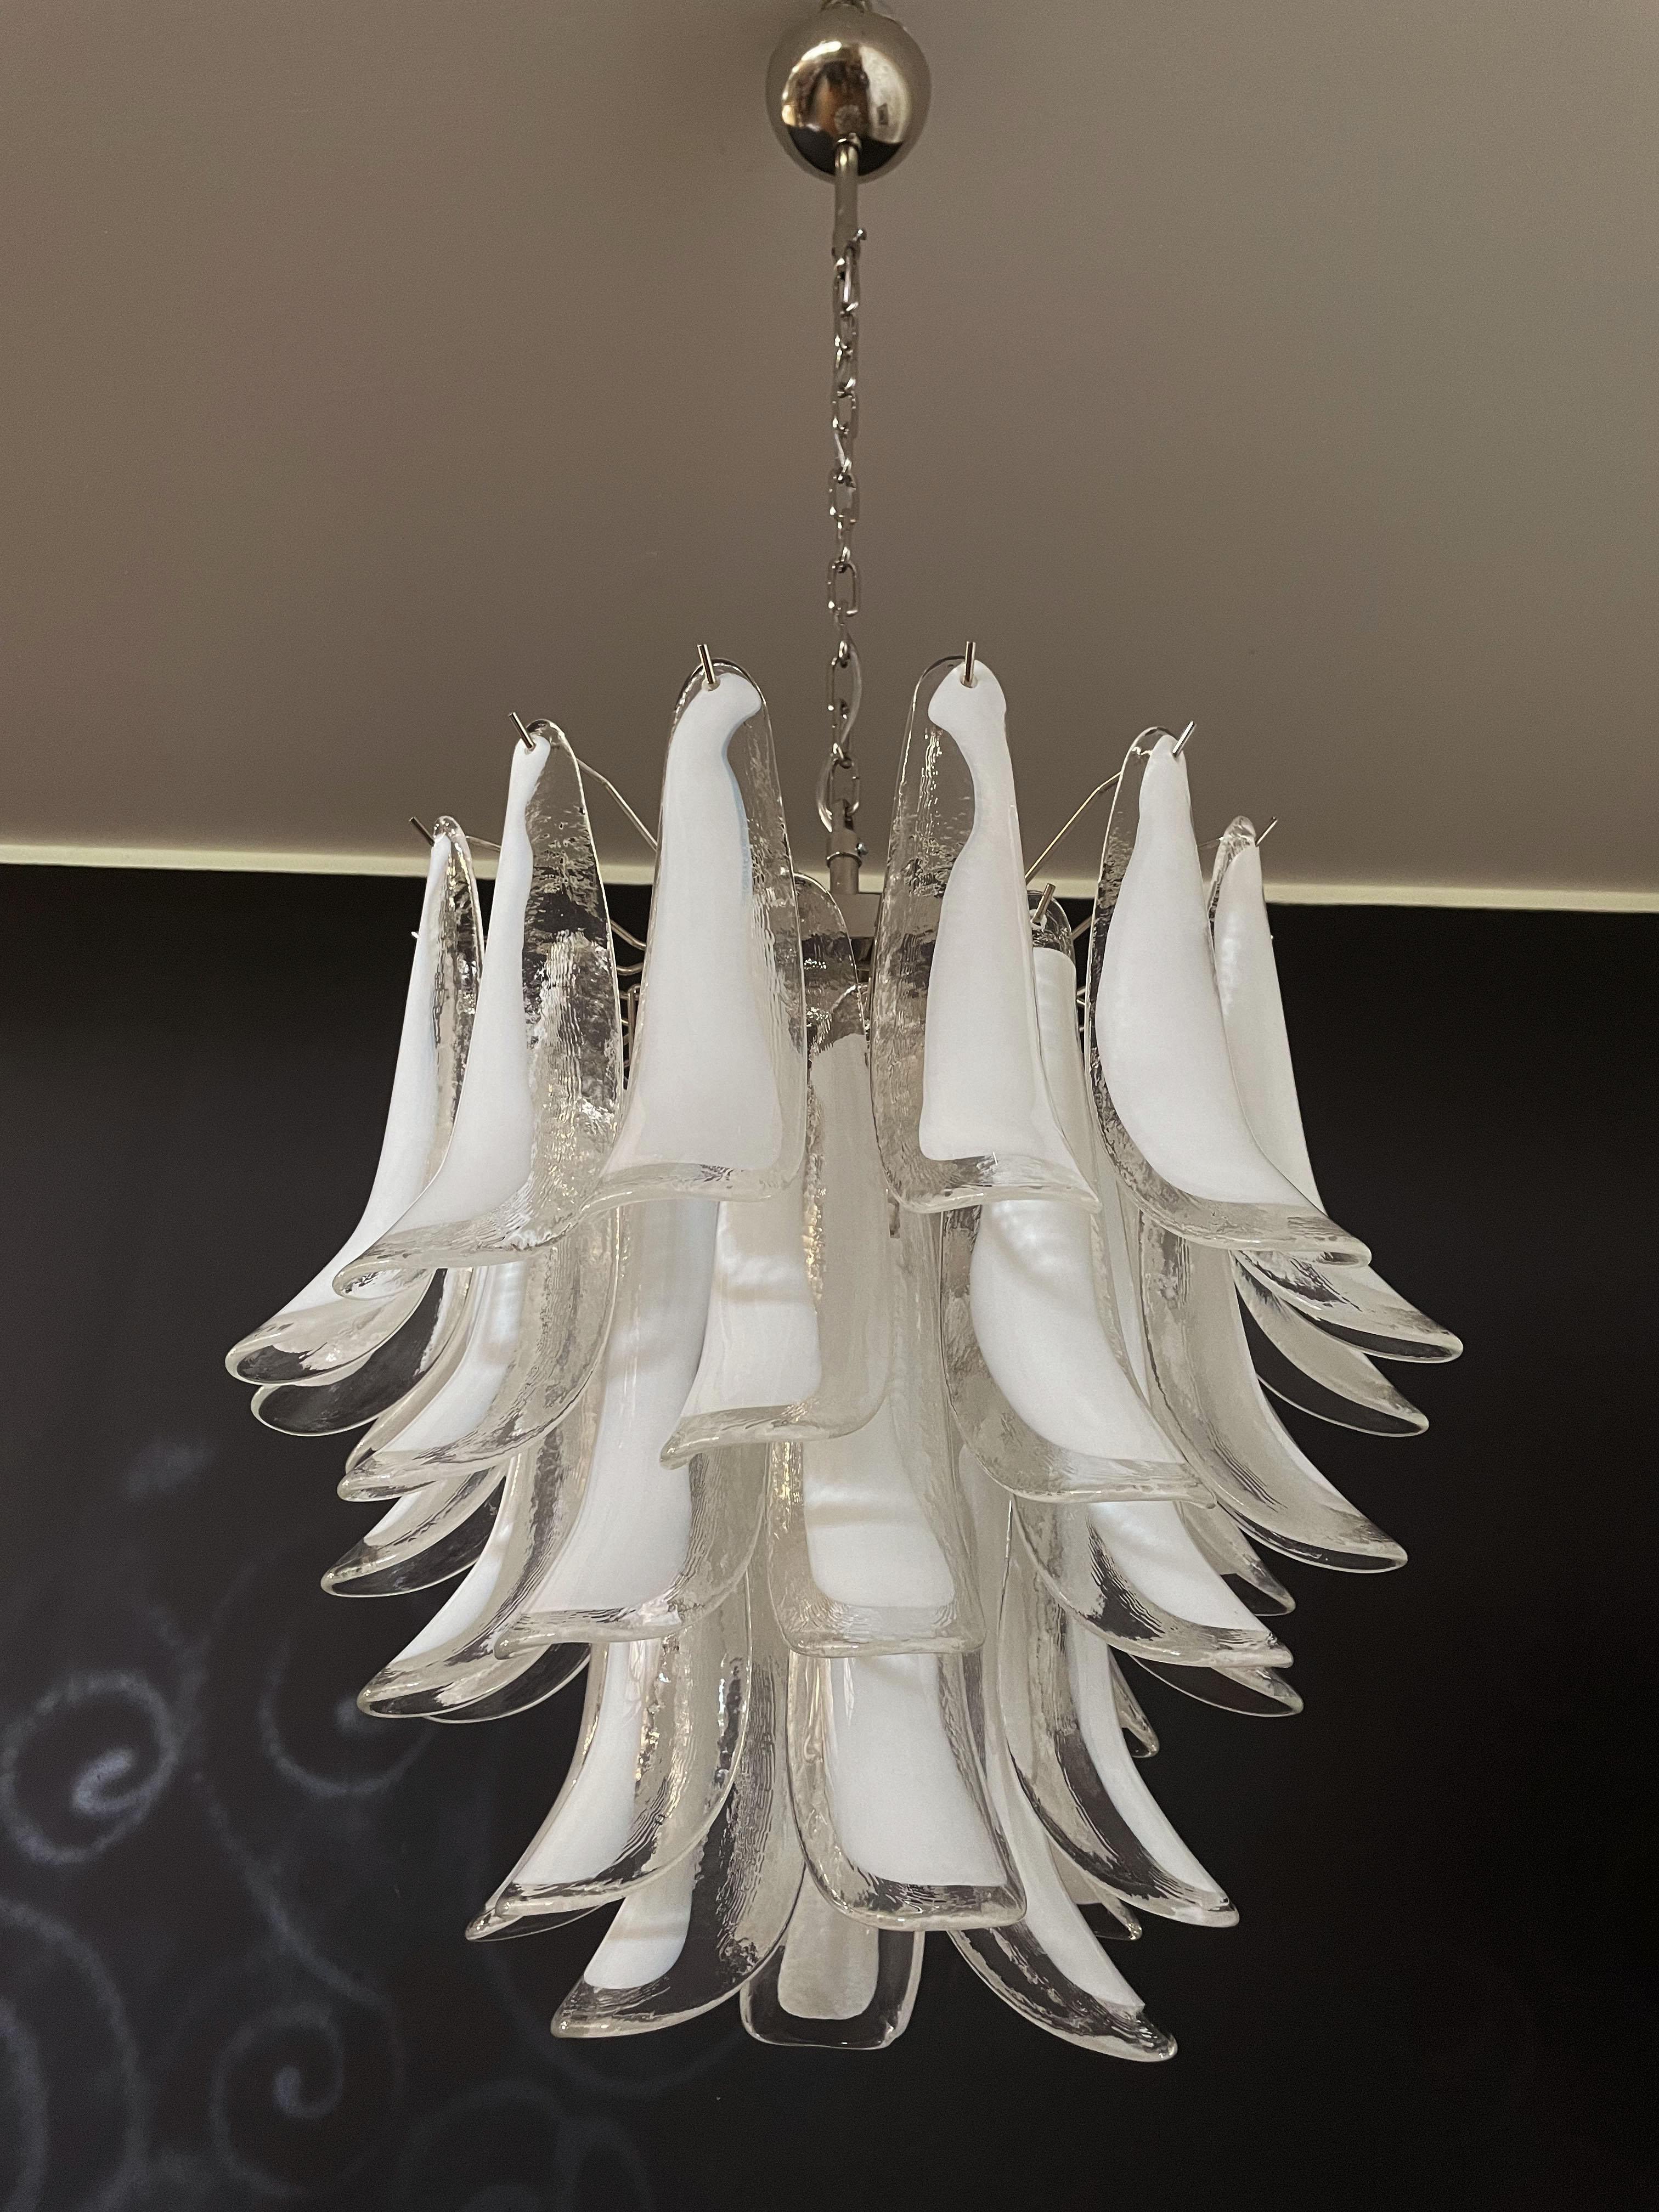 Huge Italian vintage Murano chandelier made by 41 glass petals (transparent and white “lattimo”) in a chrome frame.
Period: Late XX century 
Dimensions: 46 inches (117 cm) height with chain; 25,60 inches (65 cm) height without chain; 22,85 inches